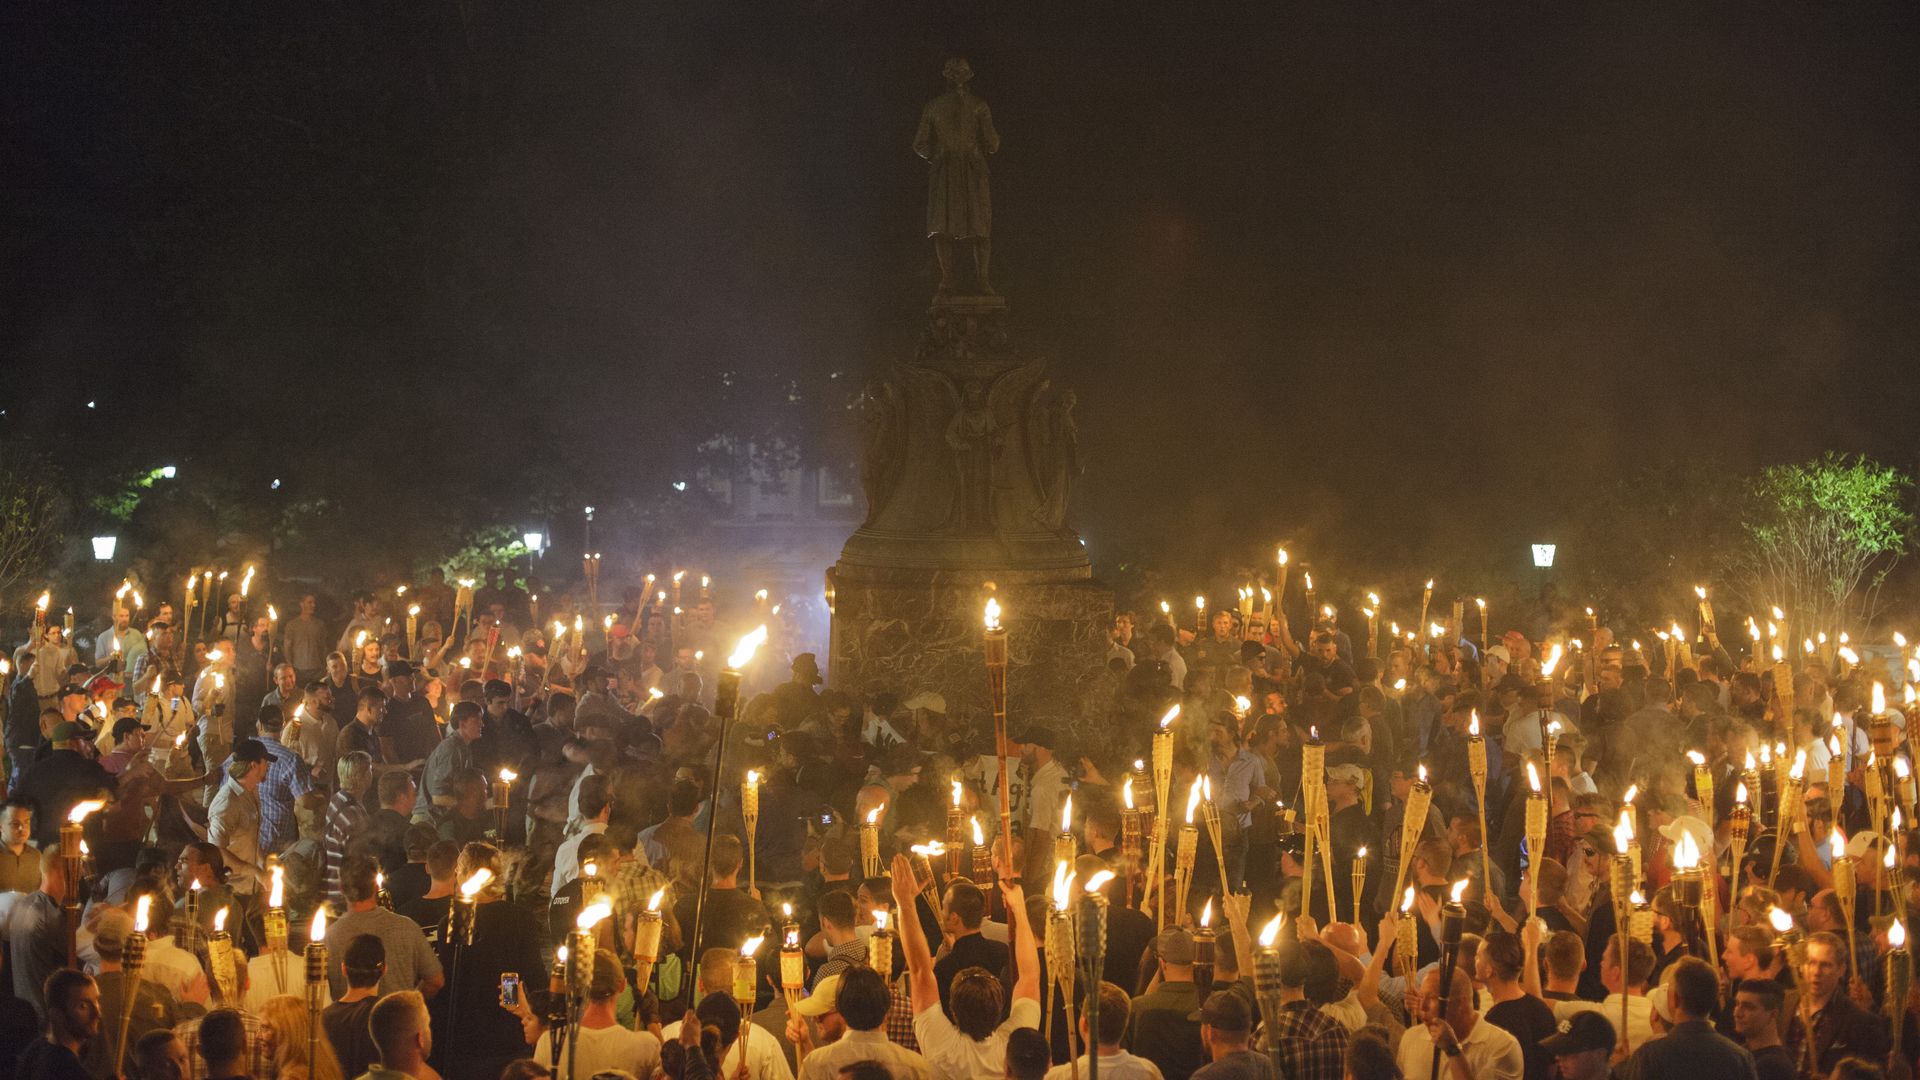 This image shows a crowd of torch-carrying people surrounding a statue of Thomas Jefferson at night.